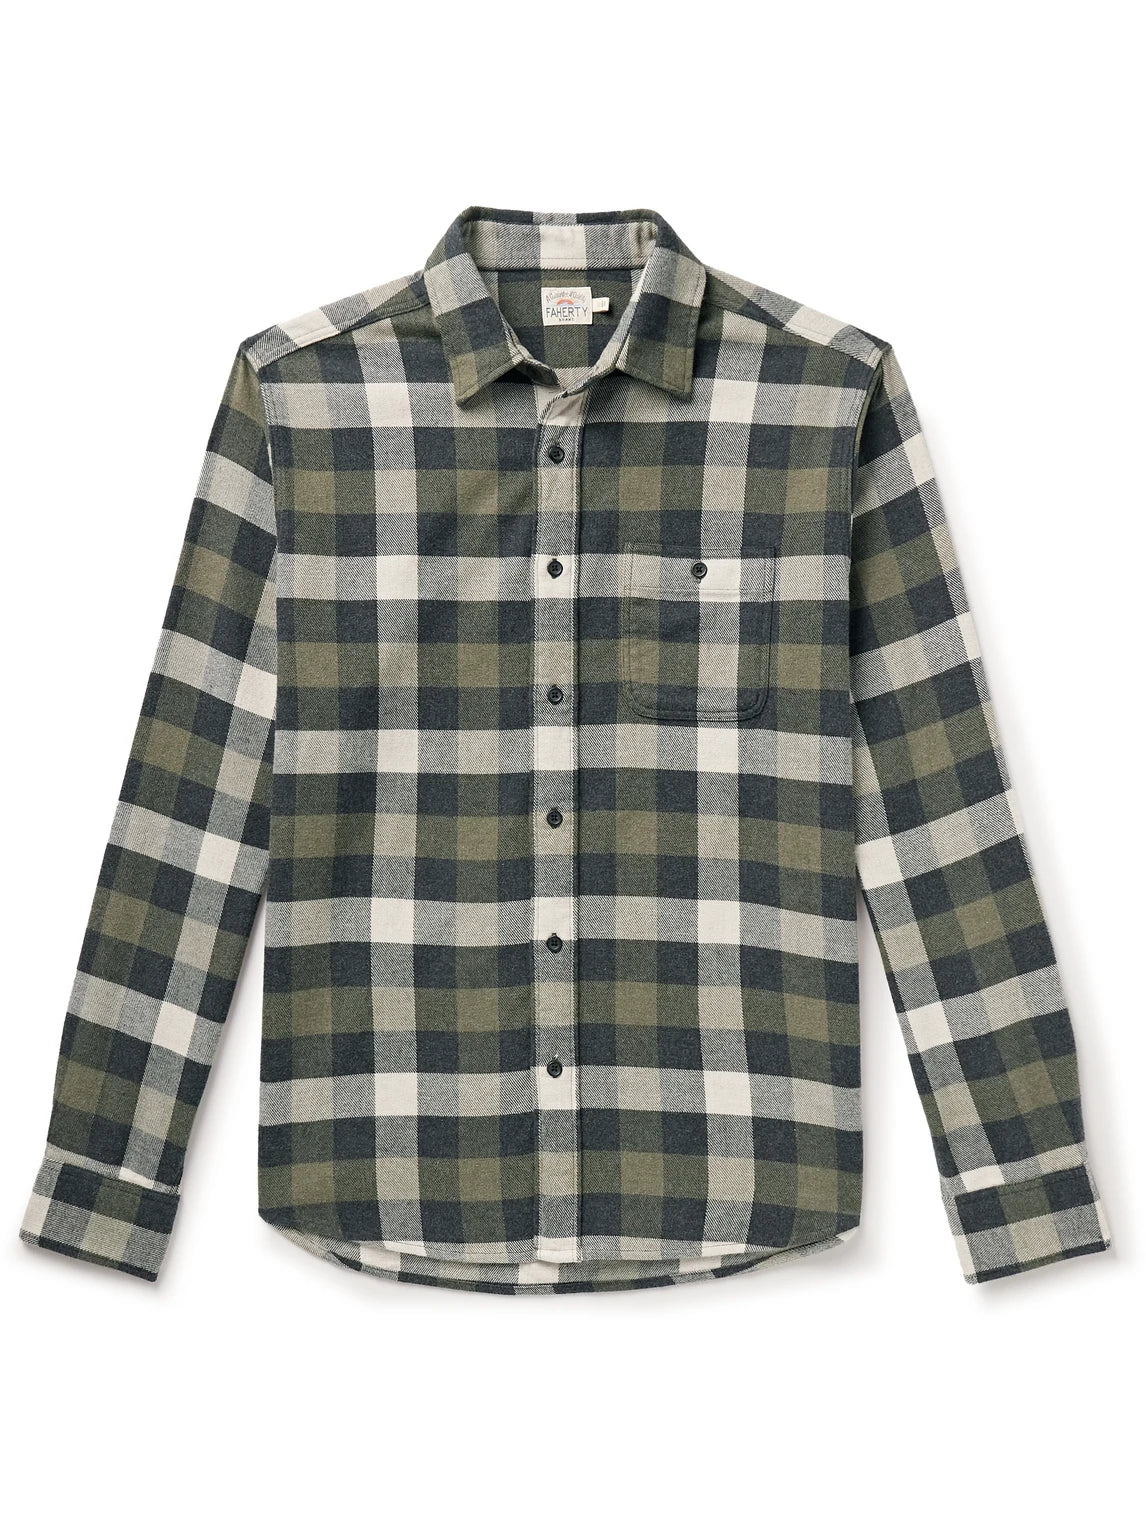 Faherty Super Brushed Flannel - Ten Mile Buffalo